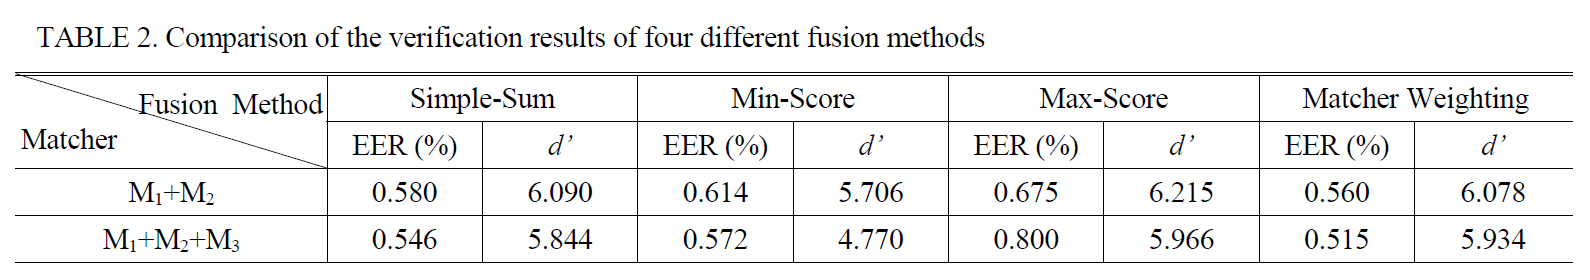 Comparison of the verification results of four different fusion methods